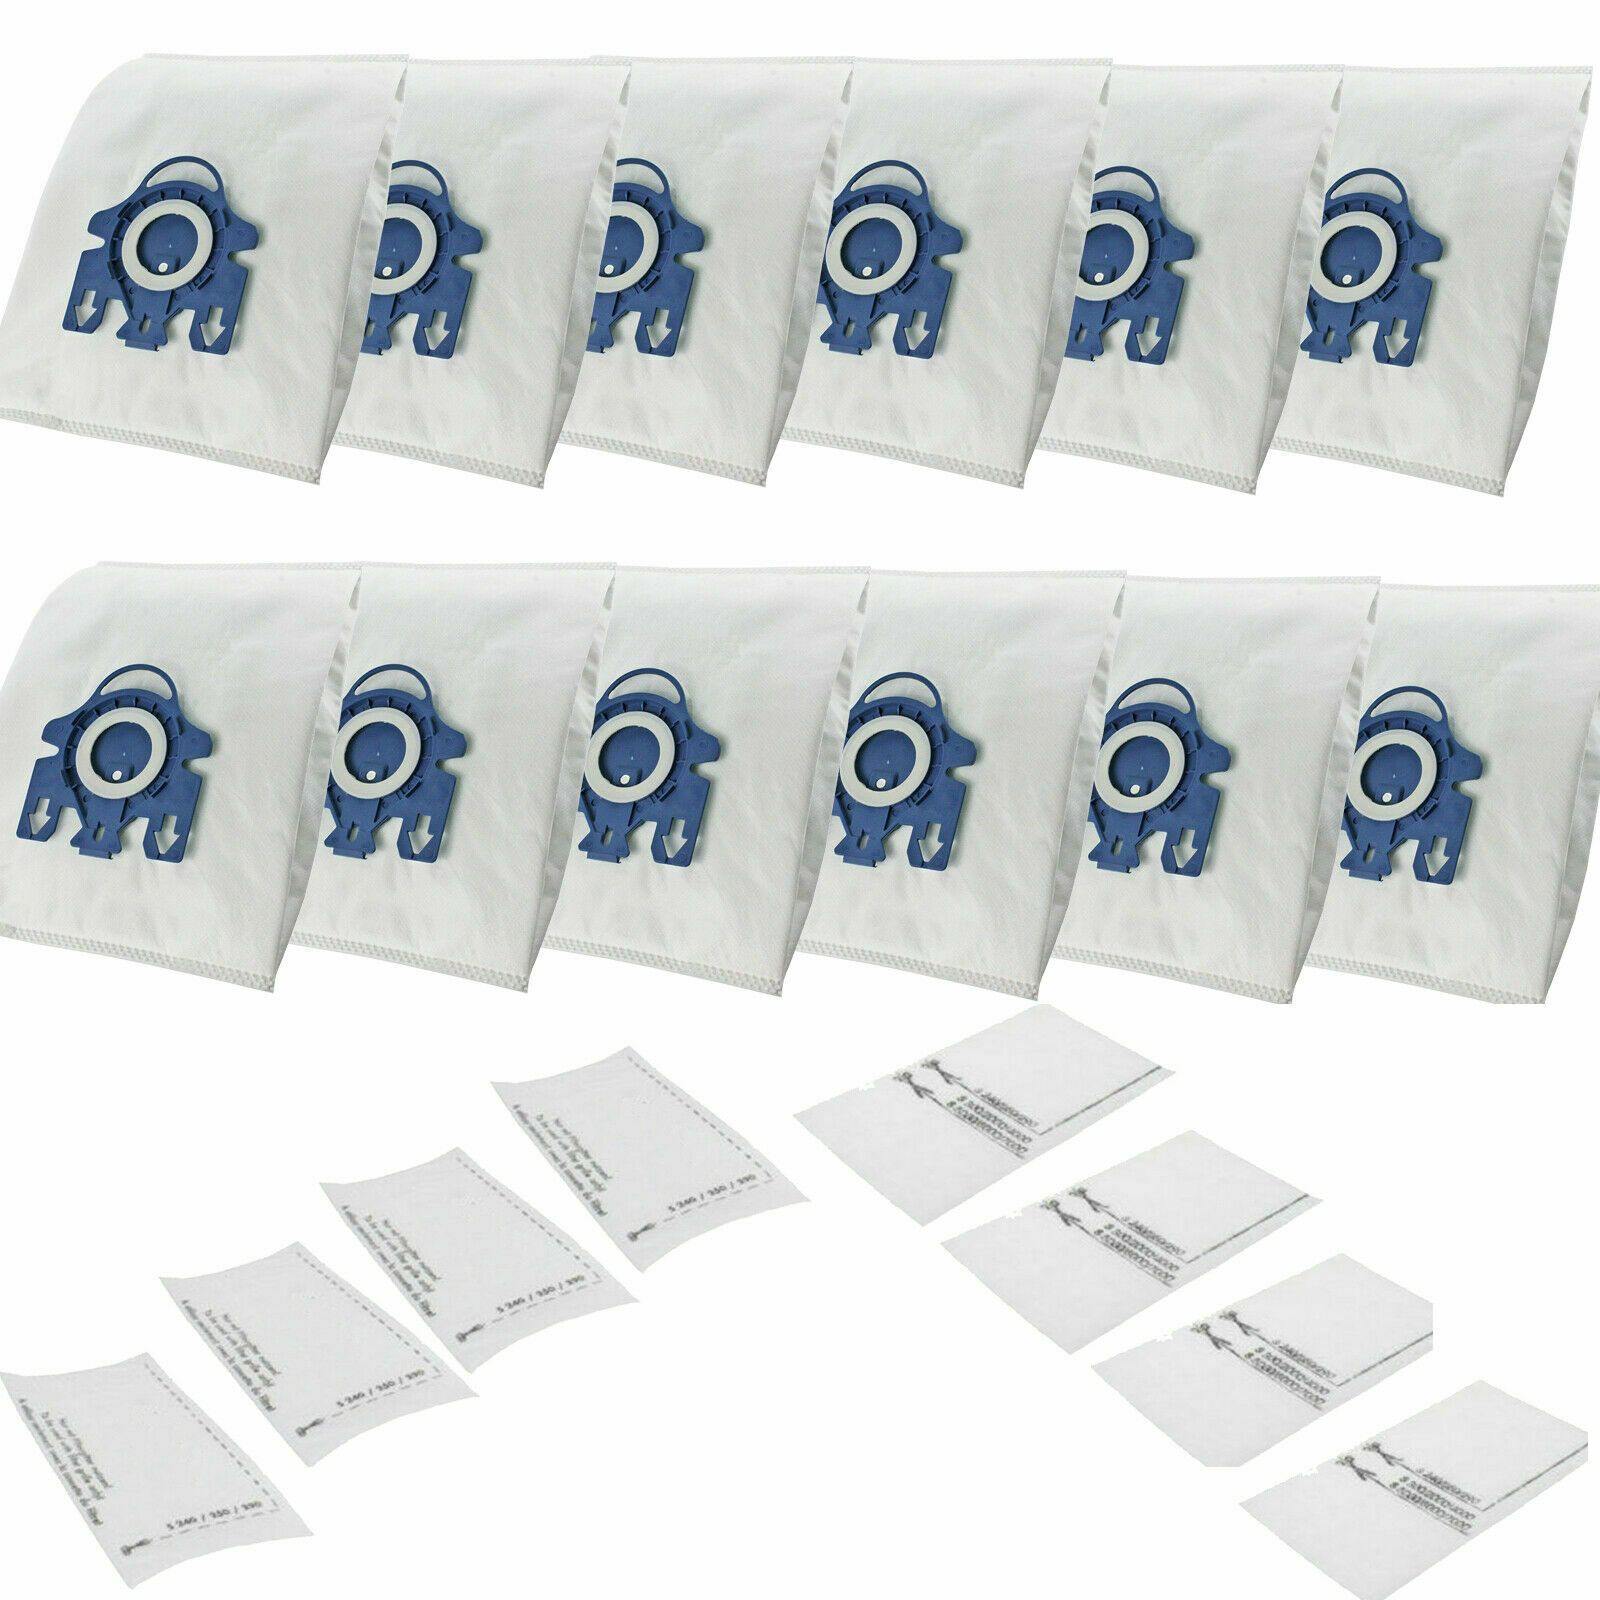 12 Vacuum Dust Bags & 8 Filters For Miele S8710 S8730 S8790 S8790 HEPA S8930 Sparesbarn